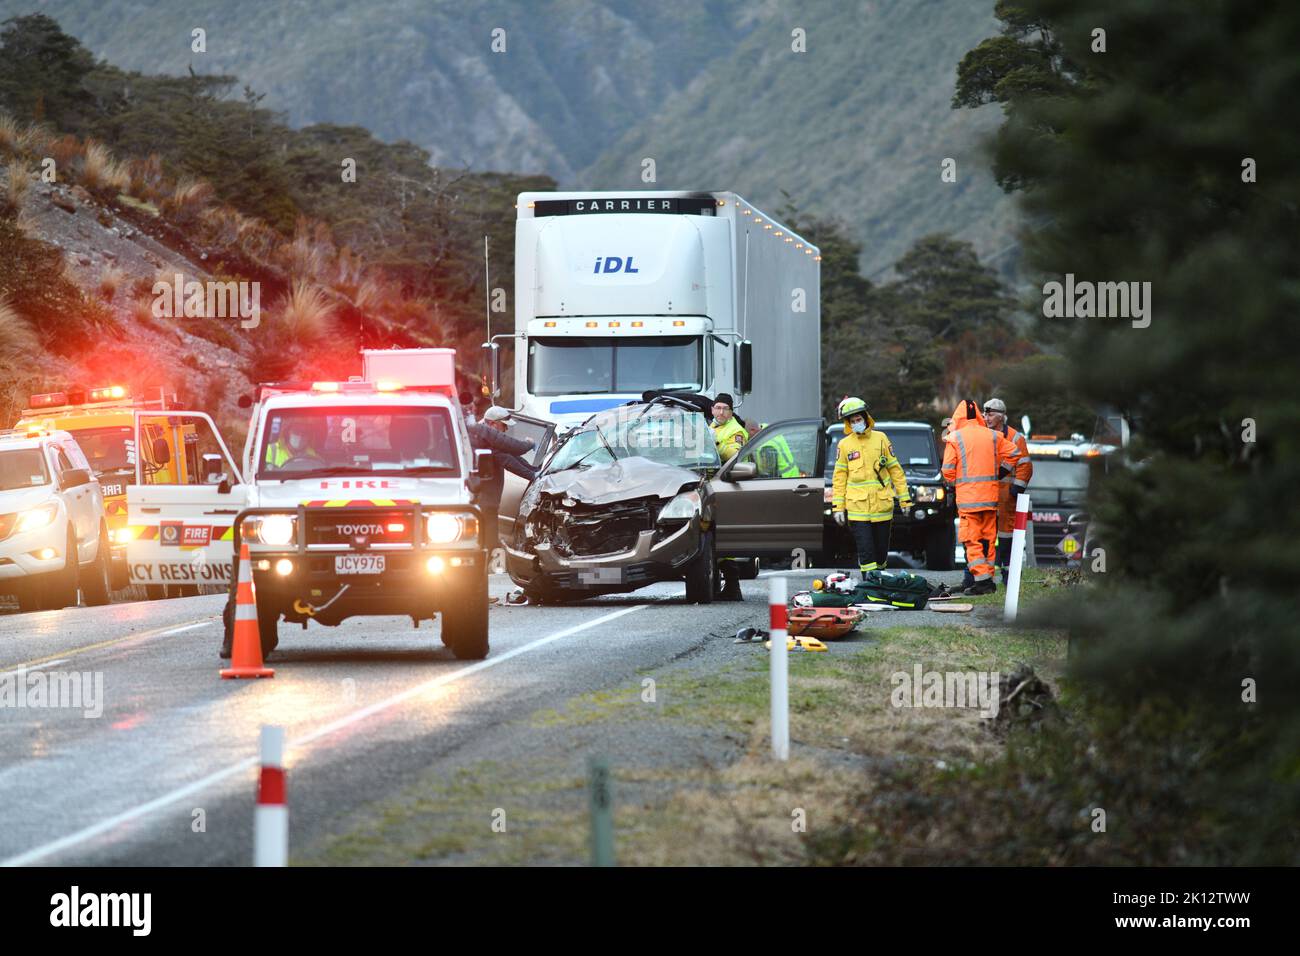 ARTHUR'S PASS, NEW ZEALAND, SEPTEMBER 5, 2022: Emergency teams respond to a single car accident after the driver lost control on black ice on State Highway 73 while crossing the Southern Alps. Grainy image shot in poor morning light. Stock Photo